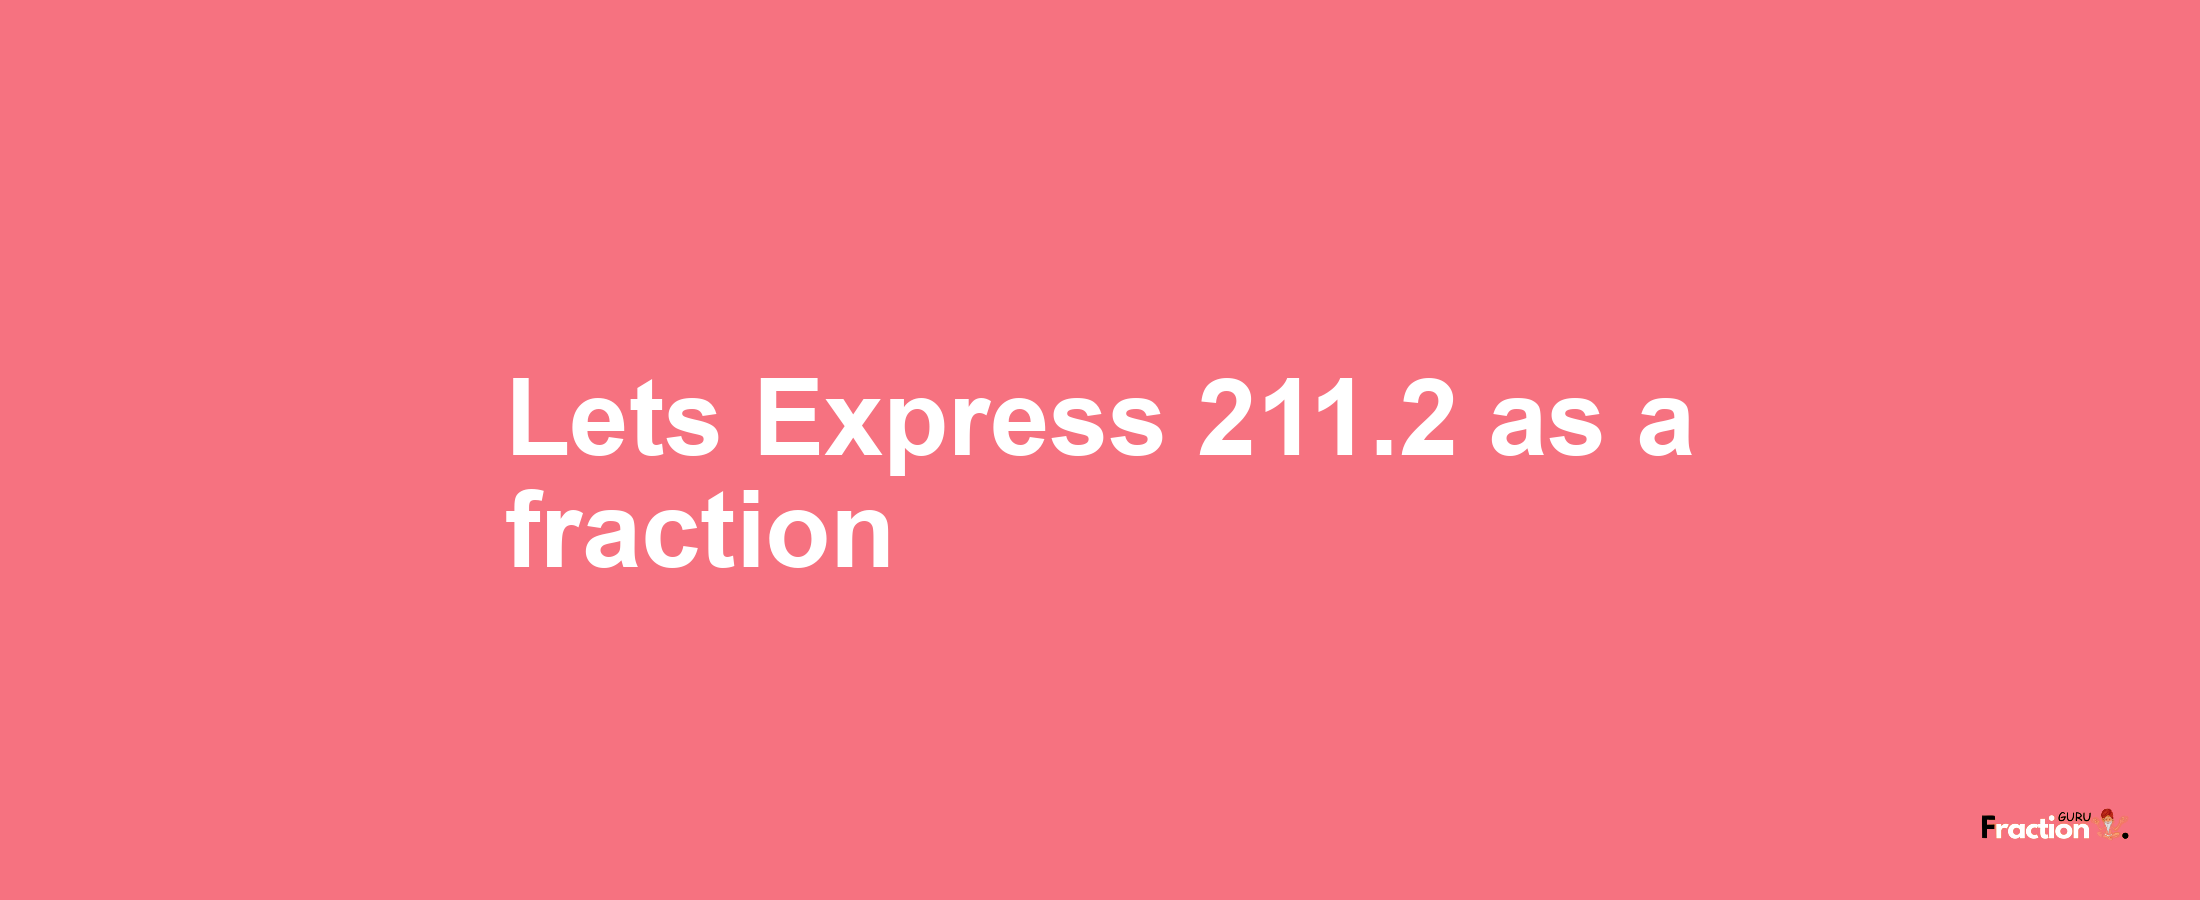 Lets Express 211.2 as afraction